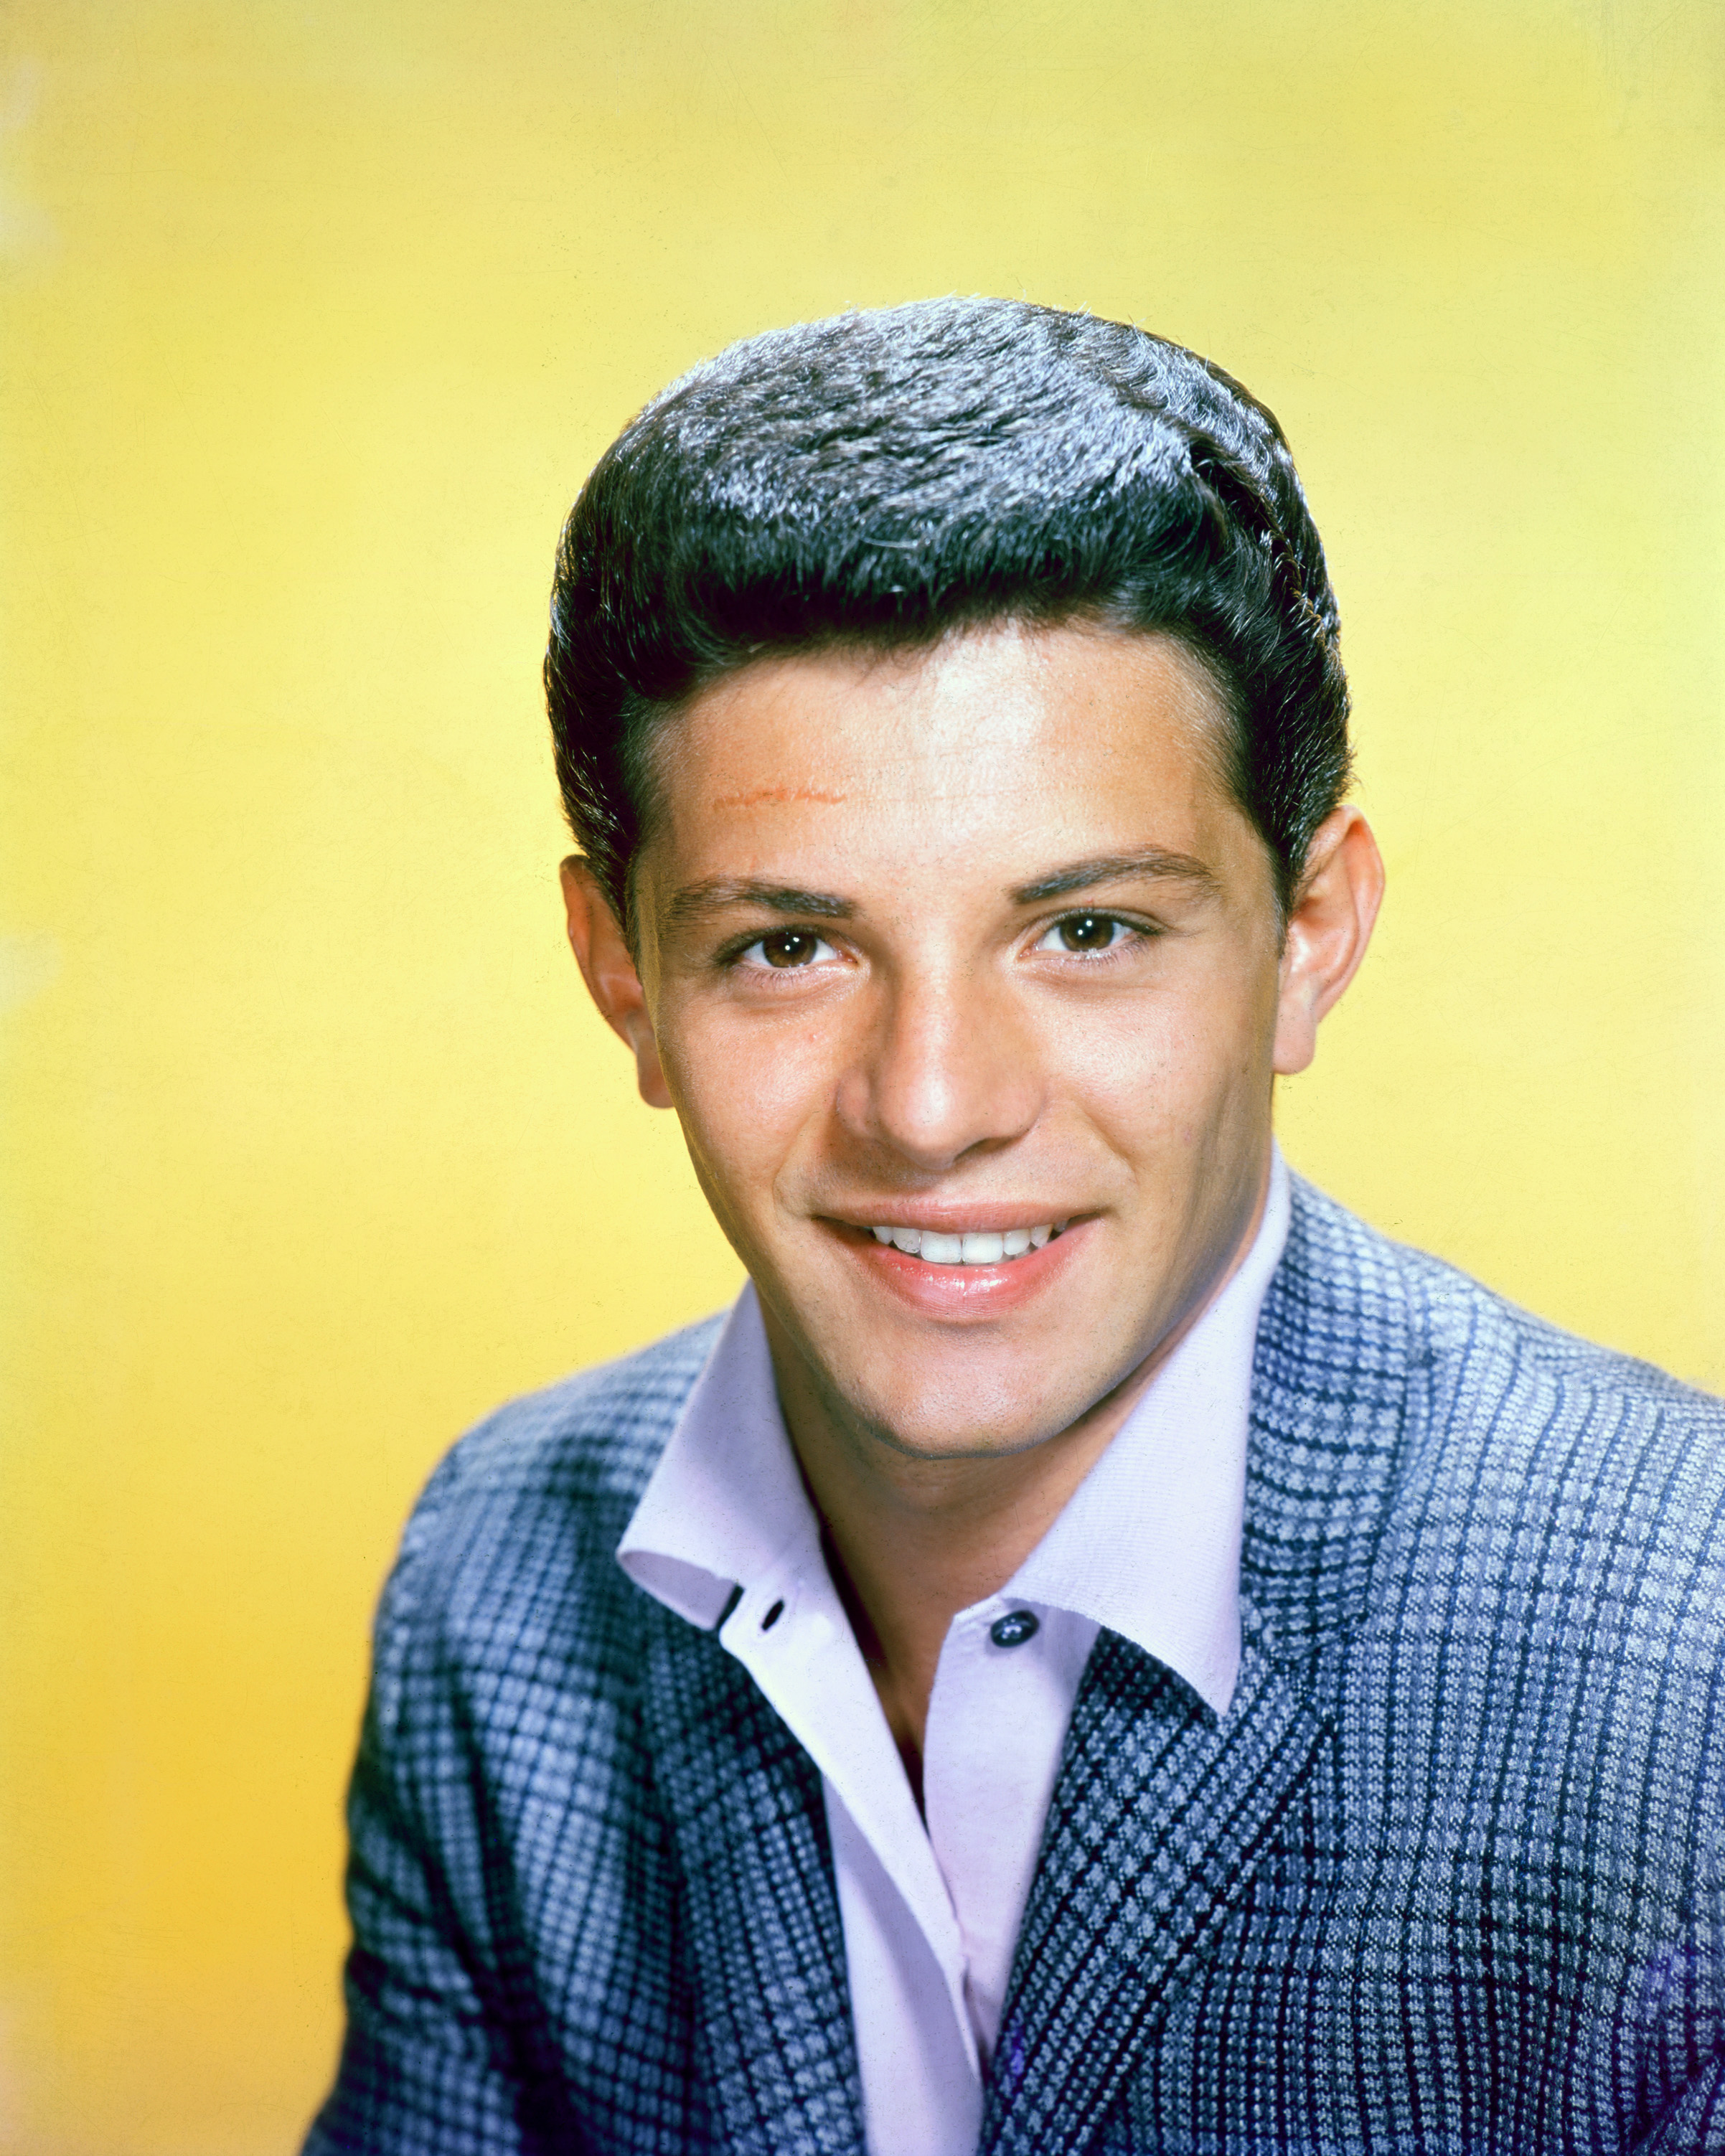 Frankie Avalon, US singer and actor, wearing a blue tweed jacket in a studio portrait, against a yellow background, circa 1960. | Source: Getty Images